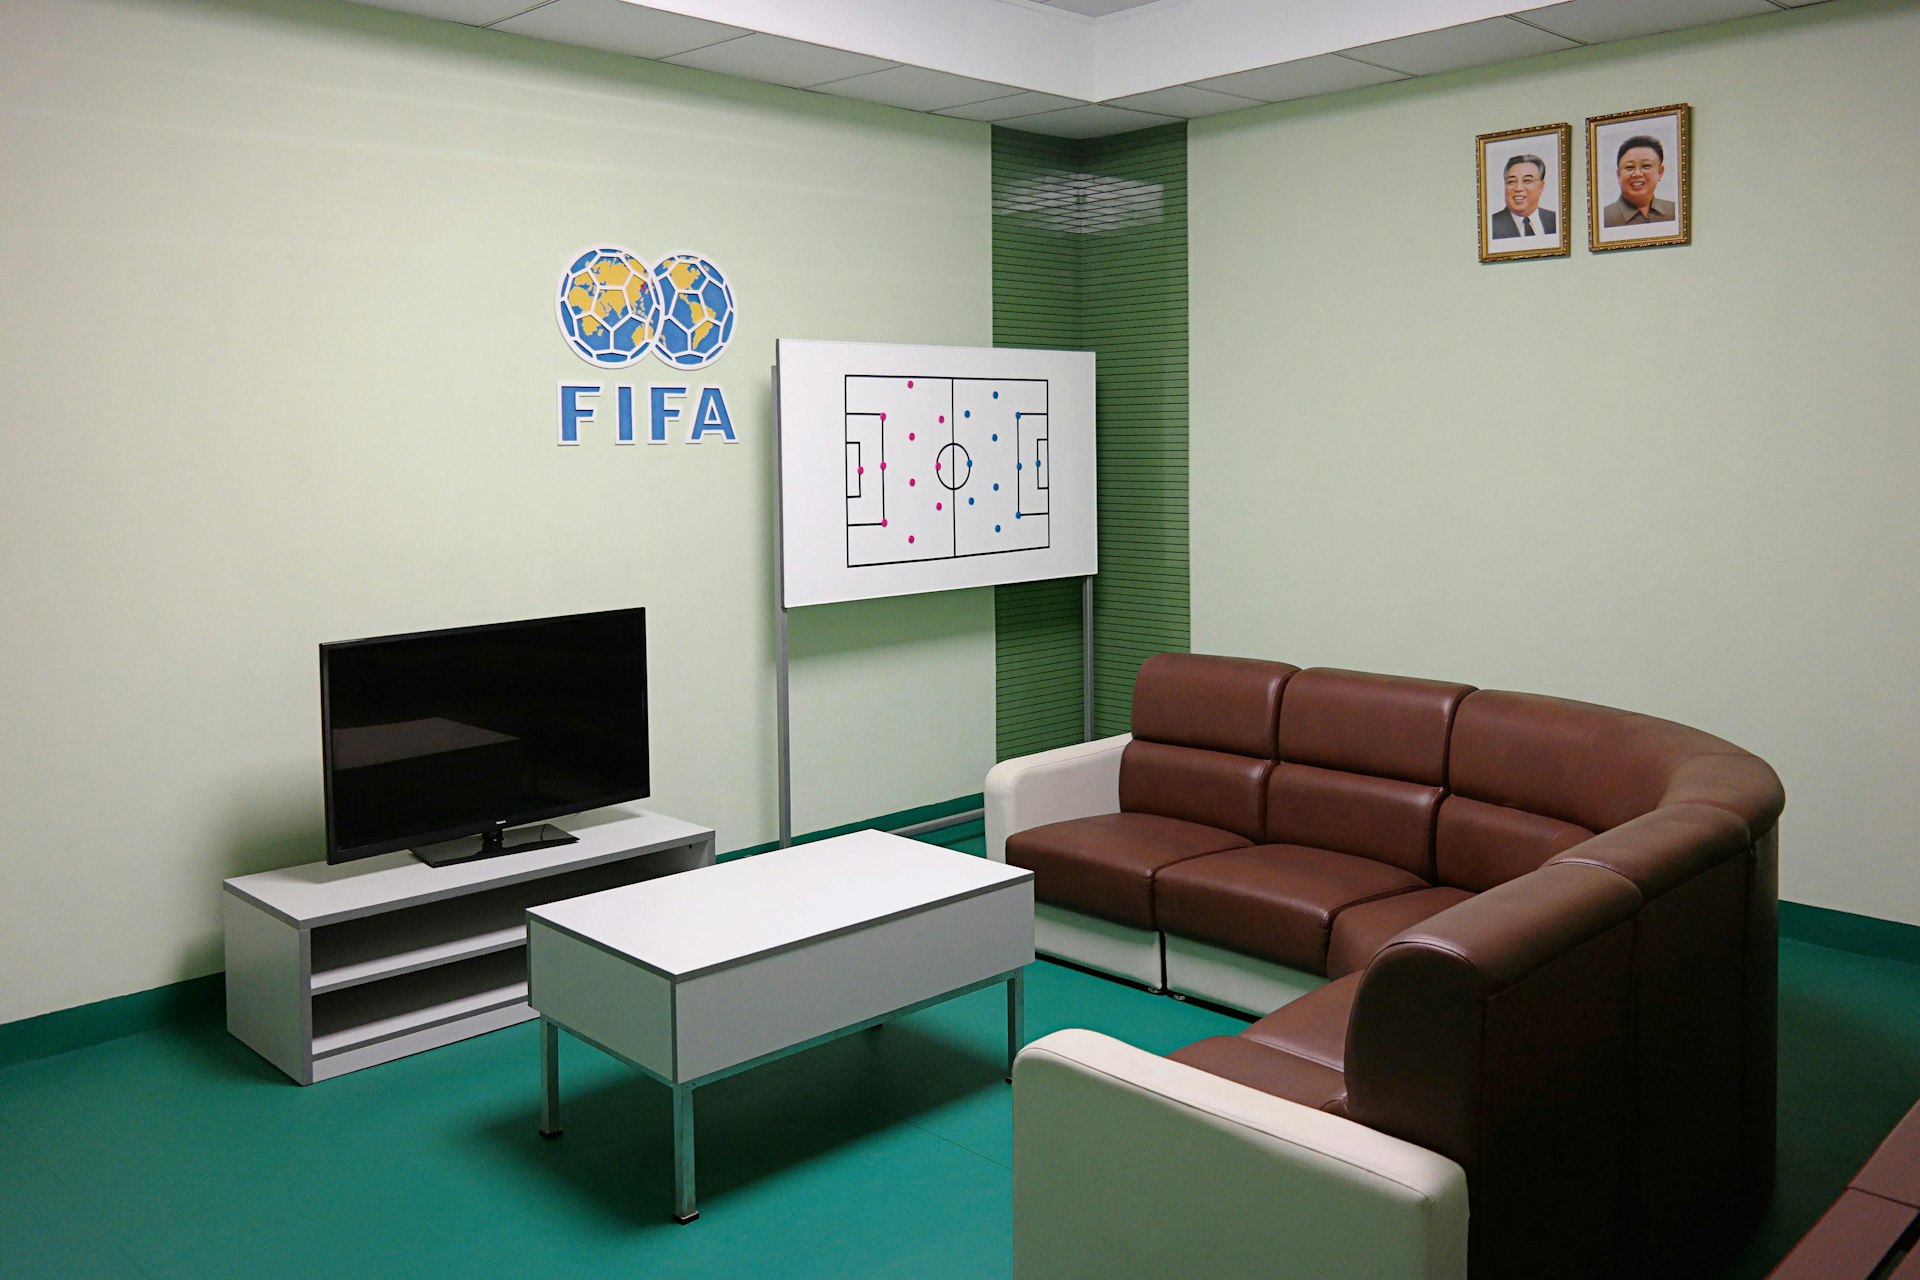 The recently renovated support rooms of the Rungrado May Day Stadium embody the essence of the current North Korean interior aesthetic, with their complementary colour schemes and synthetic, wipe-clean surfaces. Built in 1989 and used for the Mass Games performances for years, the stadium reopened in 2015 with a new football pitch and running track, as well as the optimistic addition of the FIFA and Olympic logos.